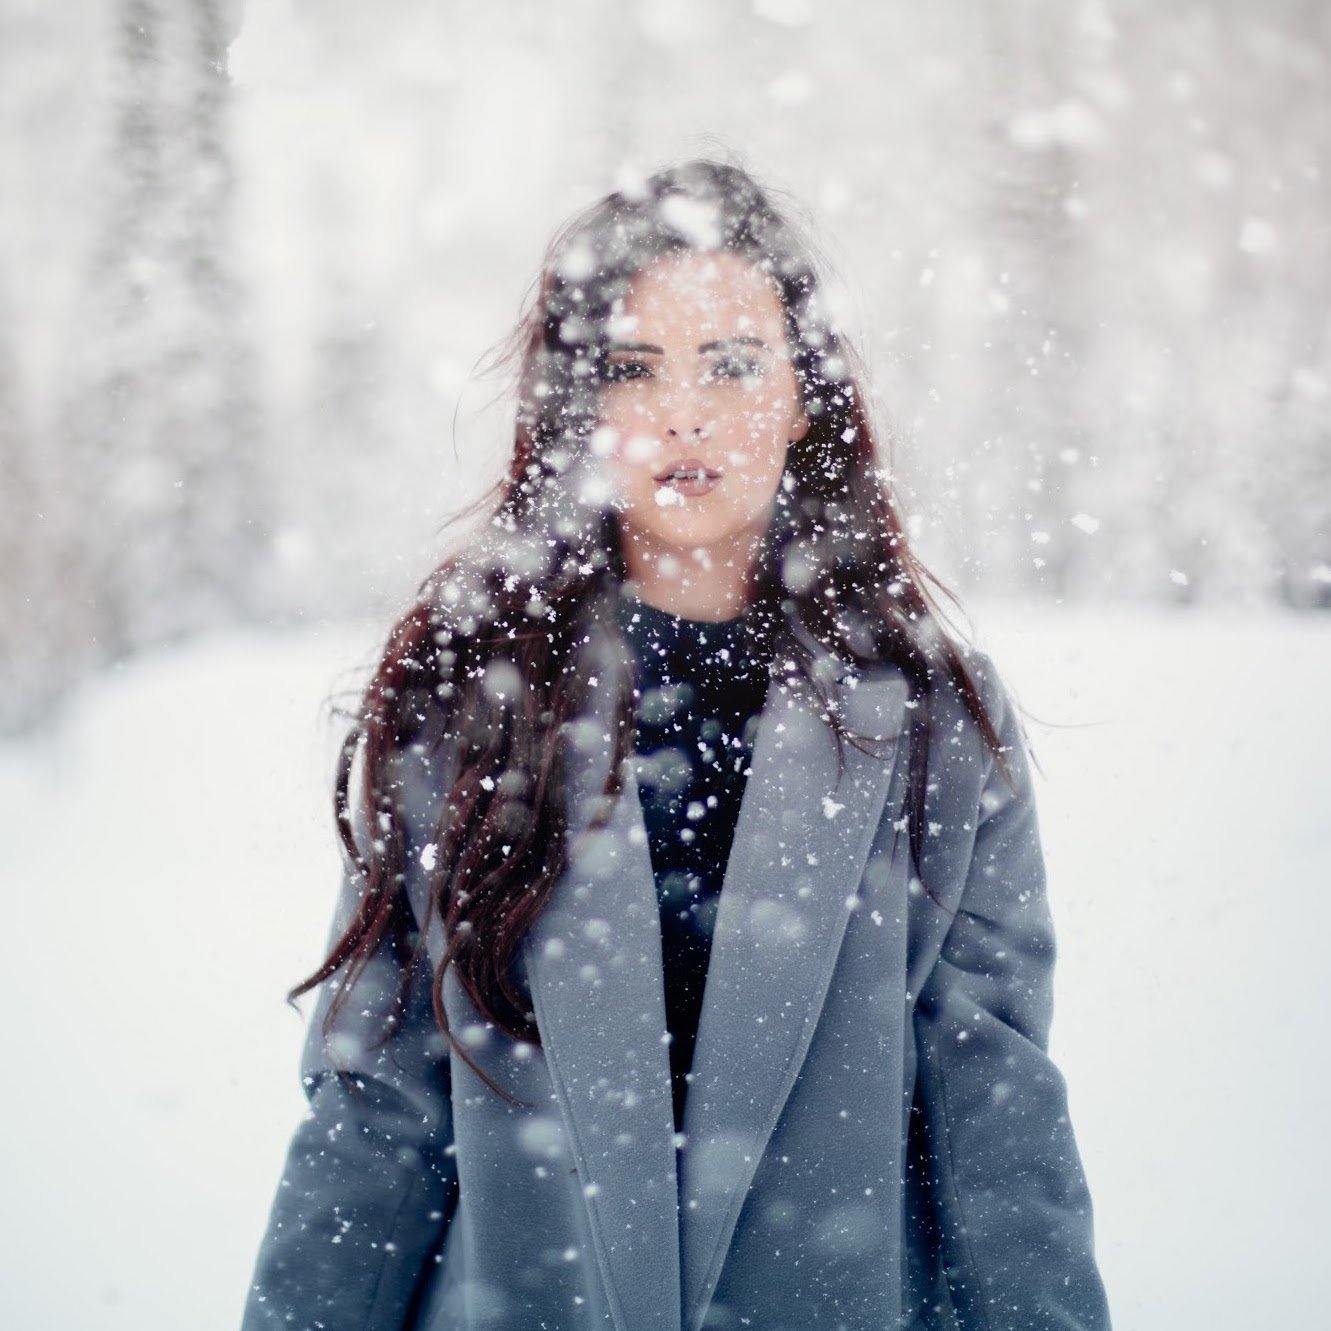 Winterize your skin with these 5 tips